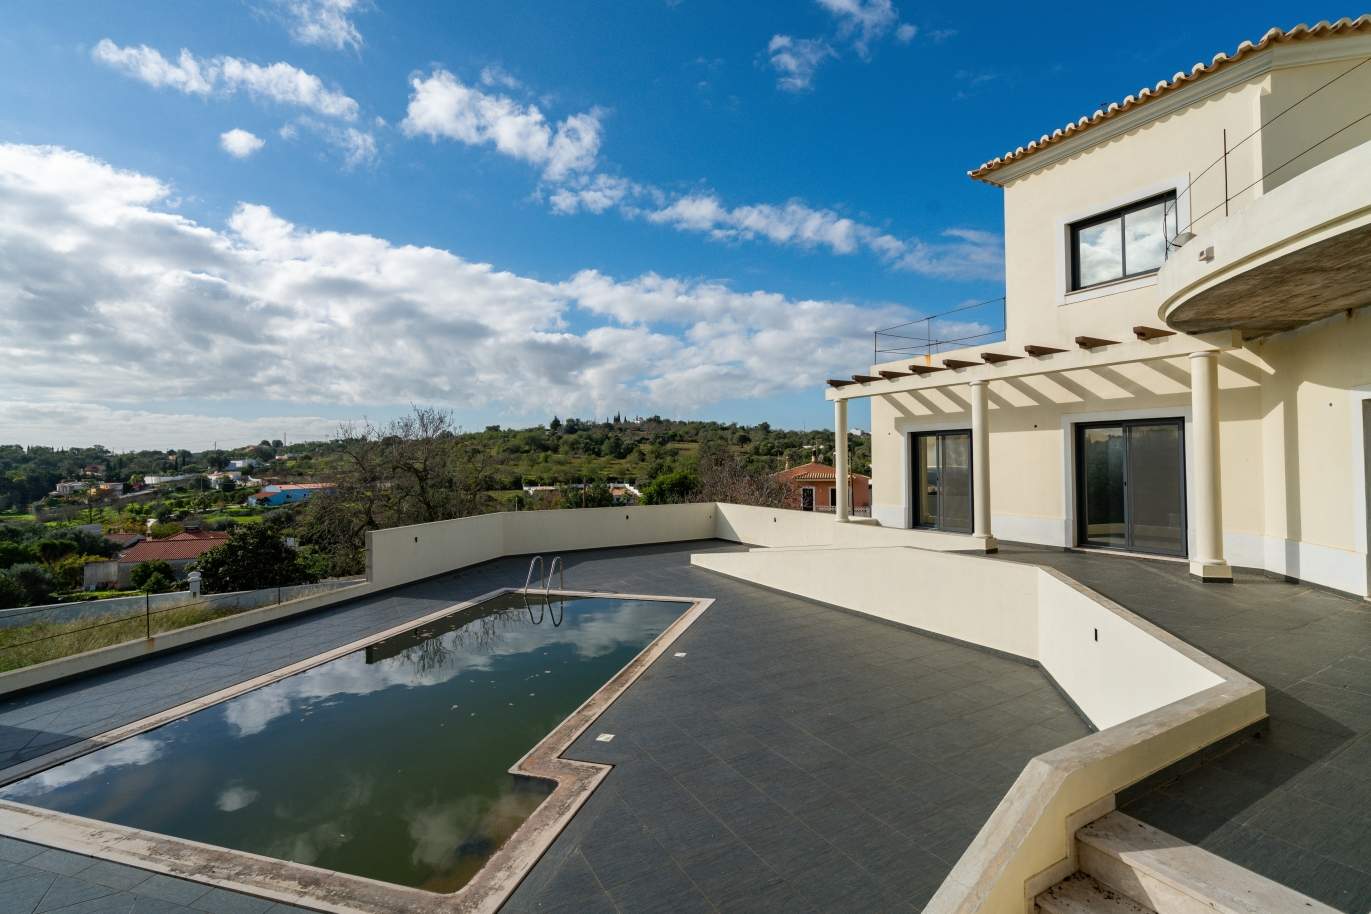 4 bedrooms Villa, under construction, with mountain and sea view, near Boliqueime, Algarve_157009